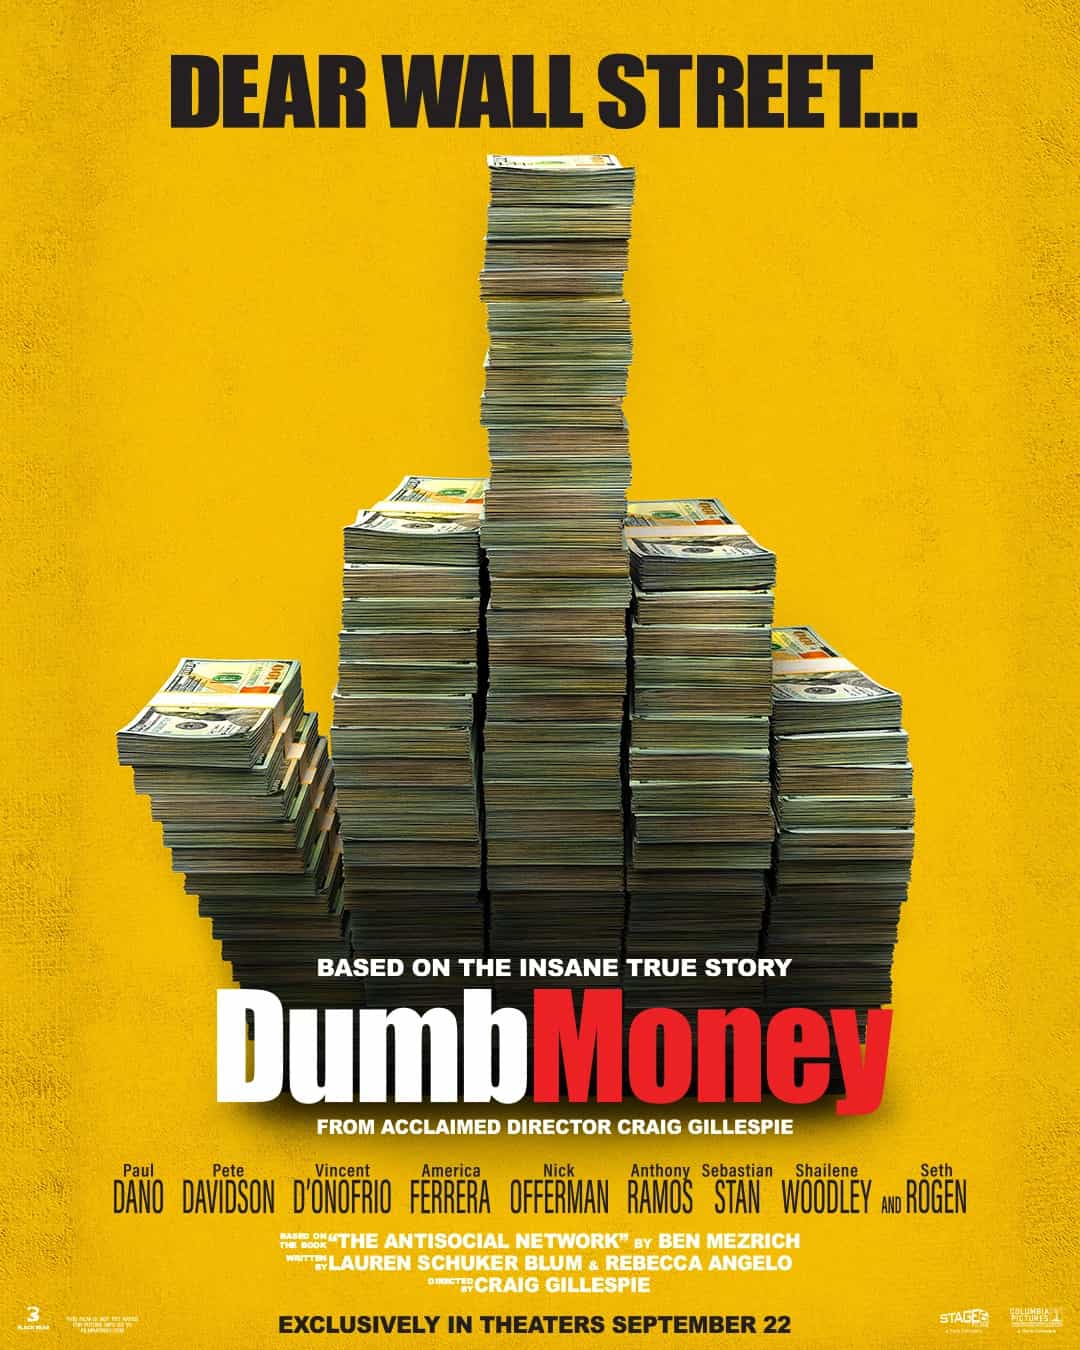 New poster has been released for Dumb Money which stars Paul Dano and Pete Davidson - movie UK release date 1st January 1970 #dumbmoney